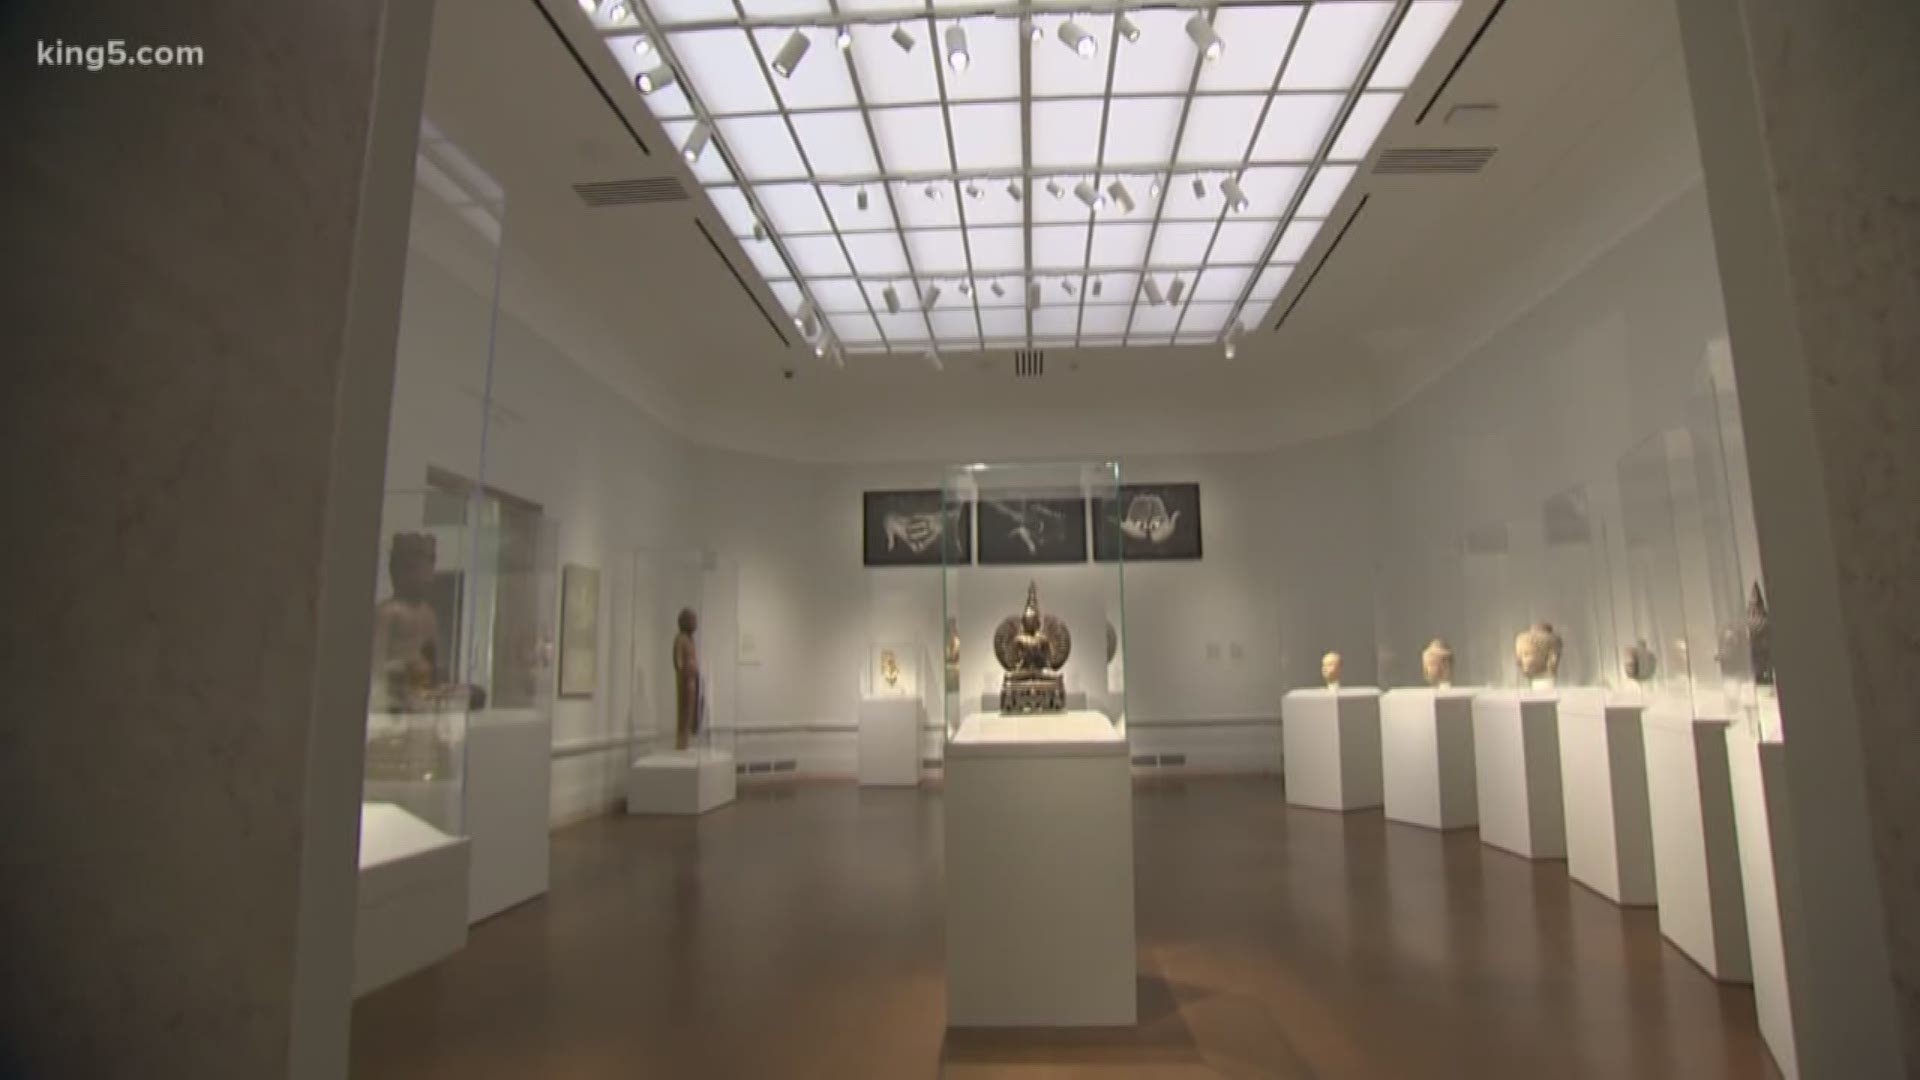 After being closed for three years, the SAM once again welcomed connoisseurs of art and diversity to the doorsteps of its re-imagined Asian Art Museum.